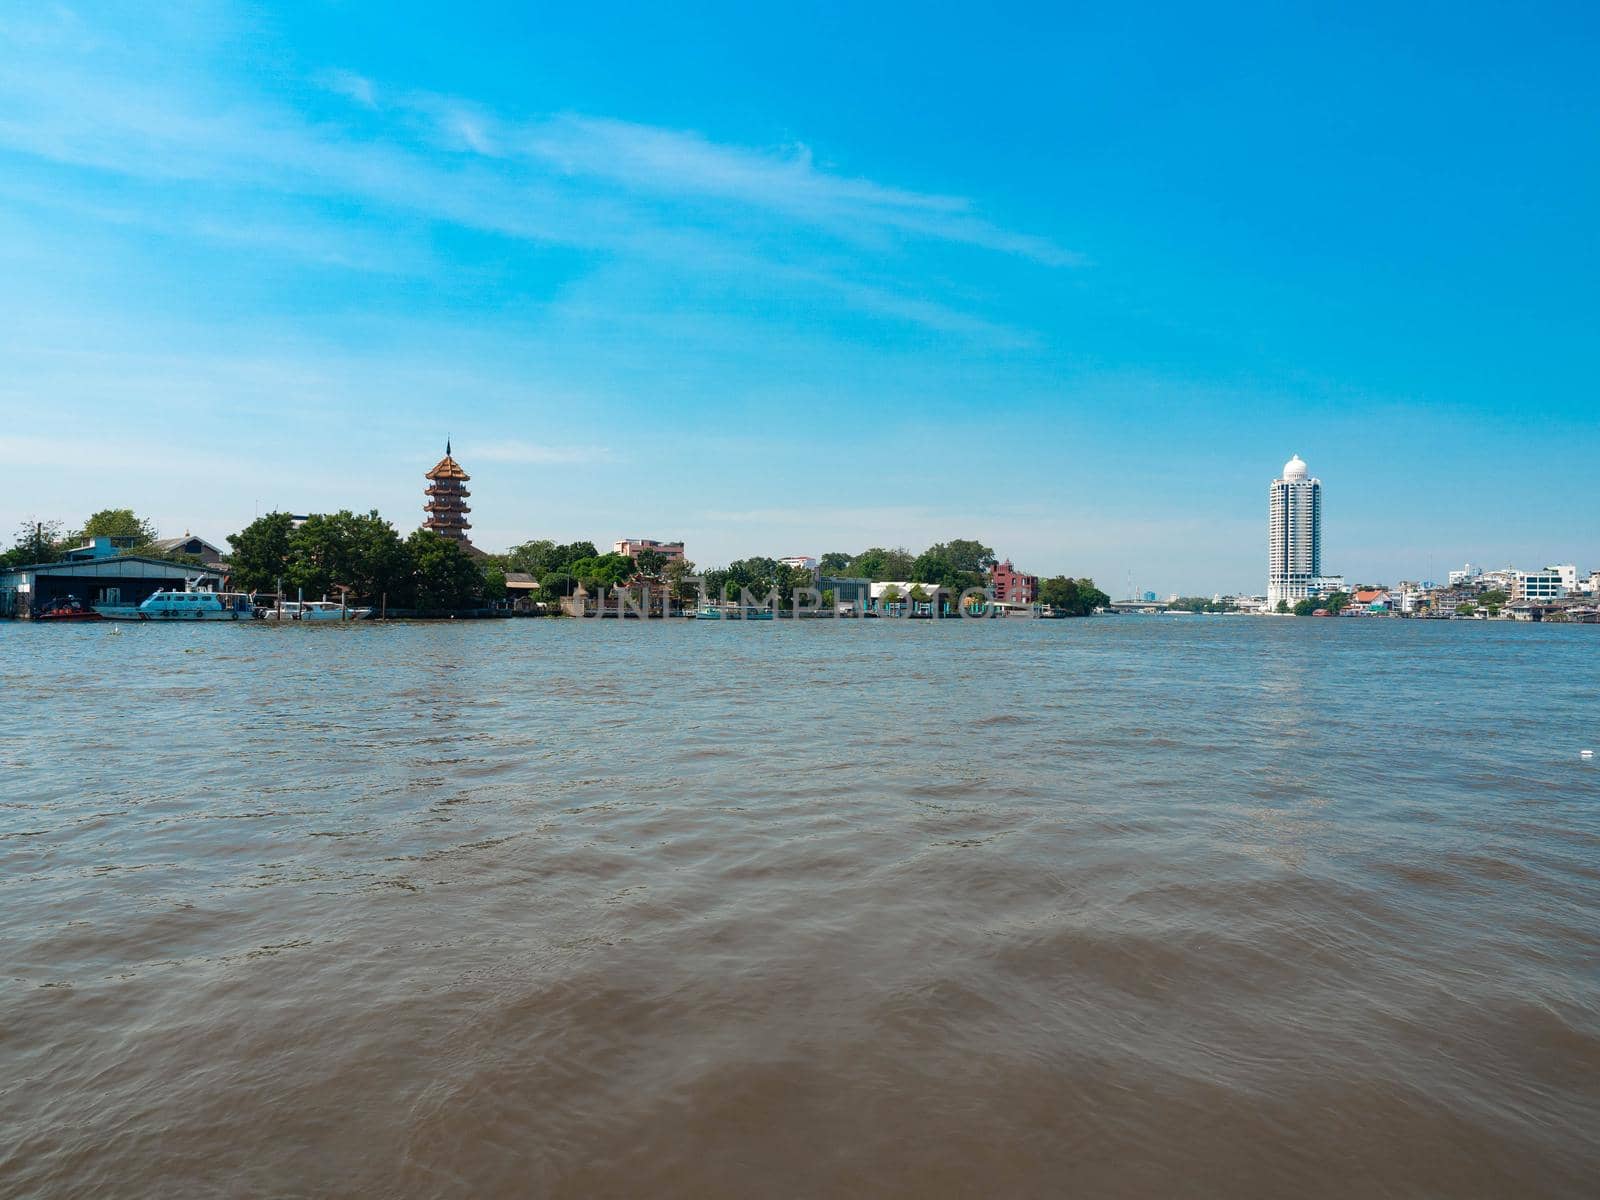 The rivers in the system on both sides show nature and the old Thai architecture buildings, new blue.